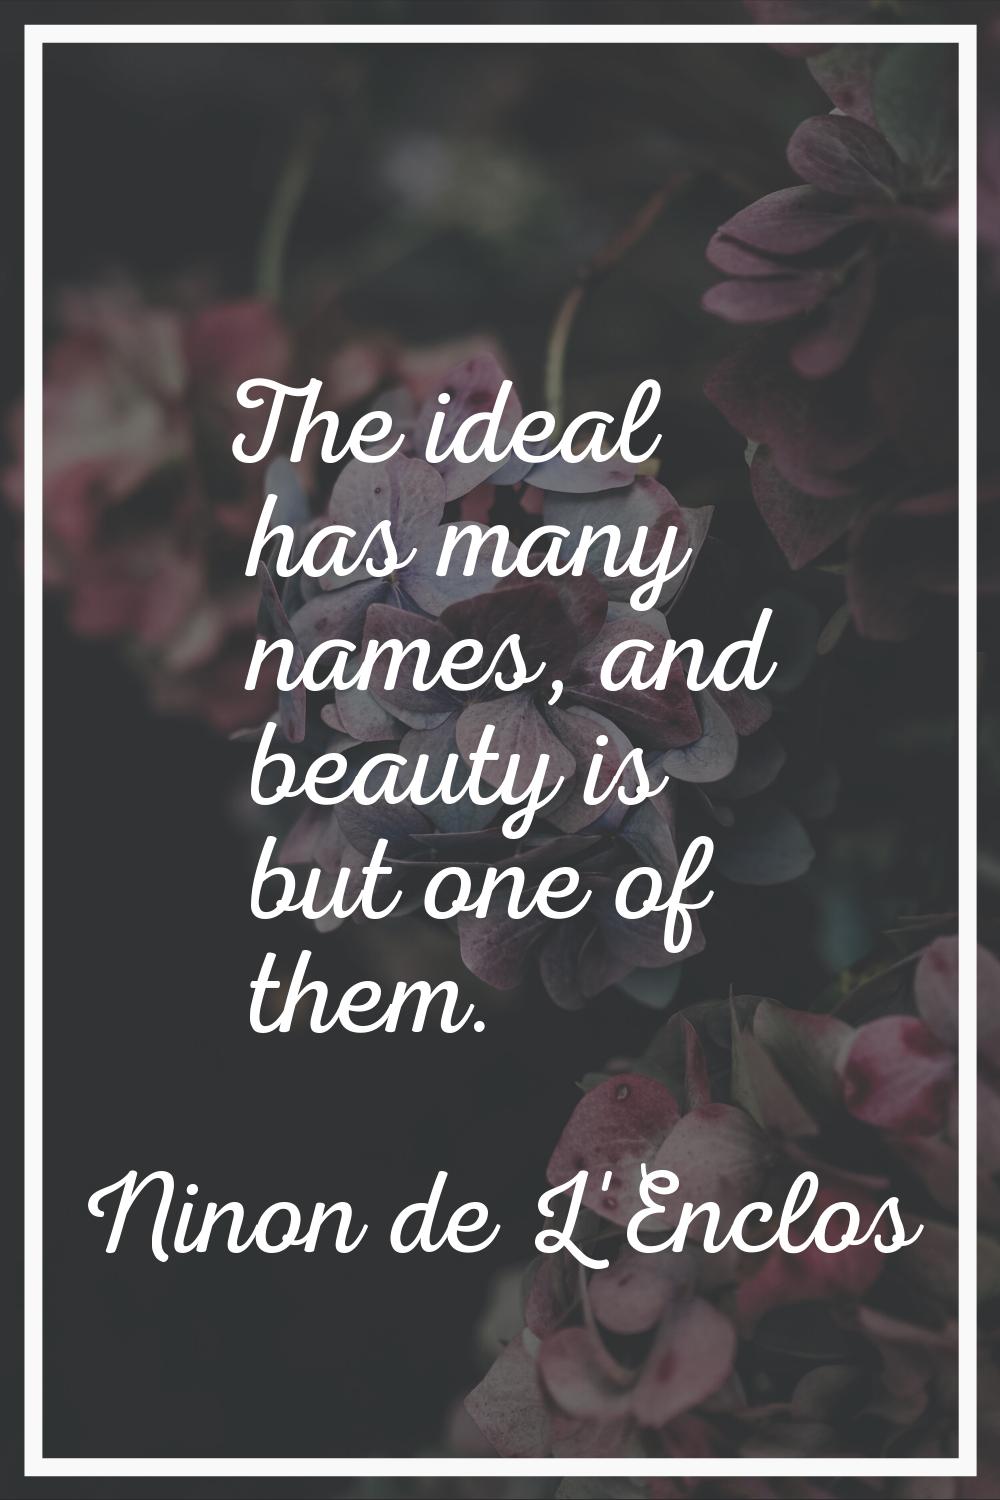 The ideal has many names, and beauty is but one of them.